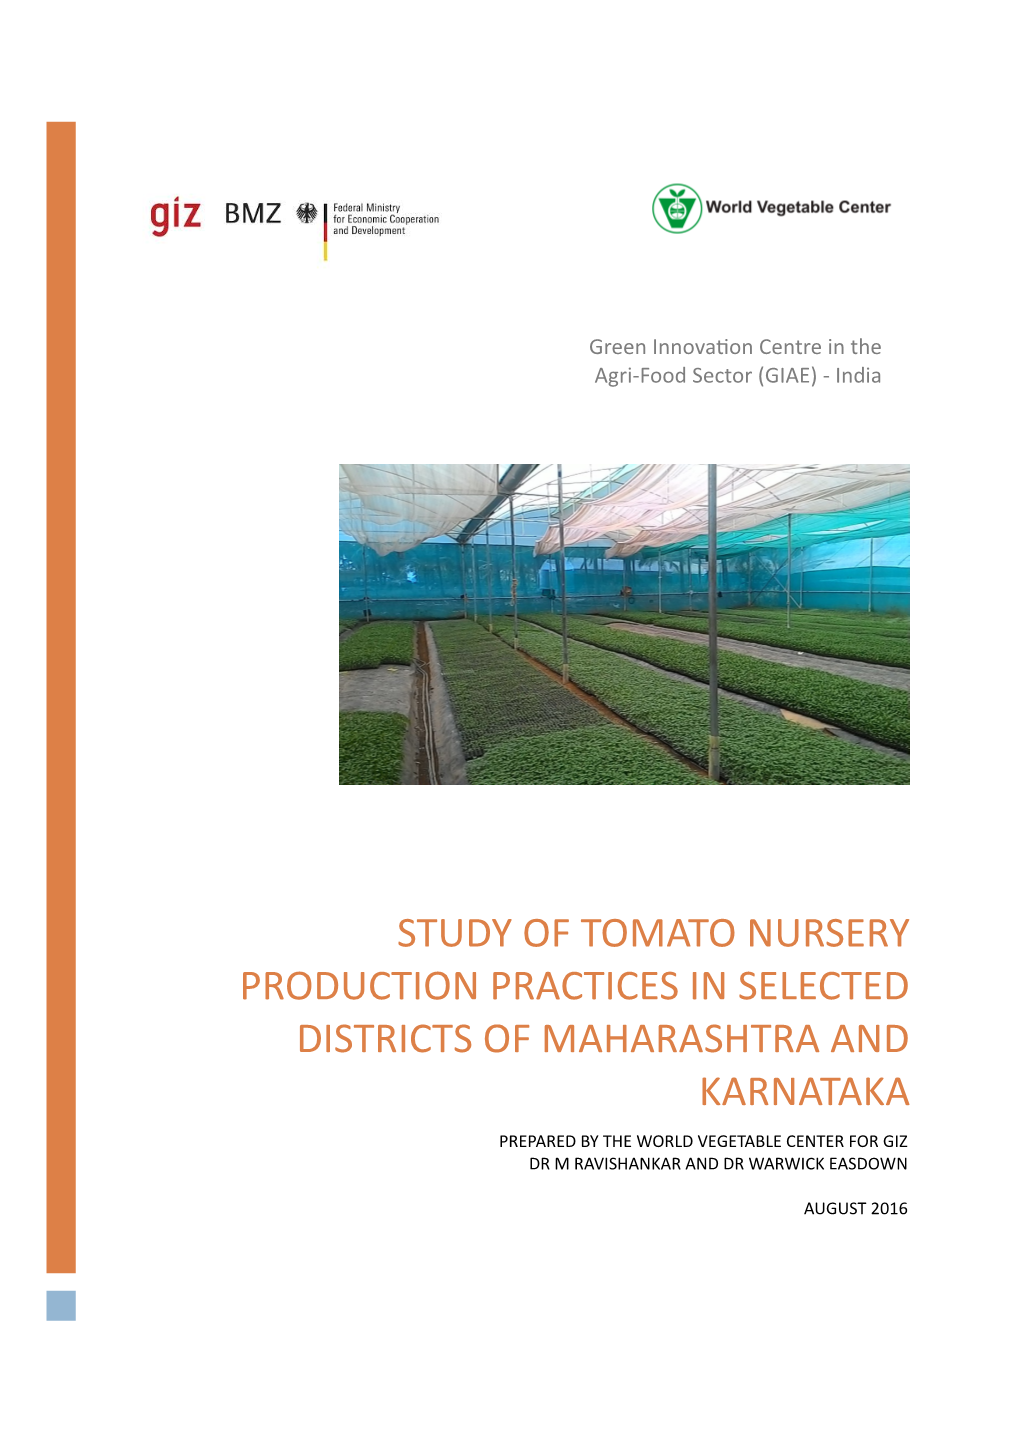 Study of Tomato Nursery Production Practices in Selected Districts Of